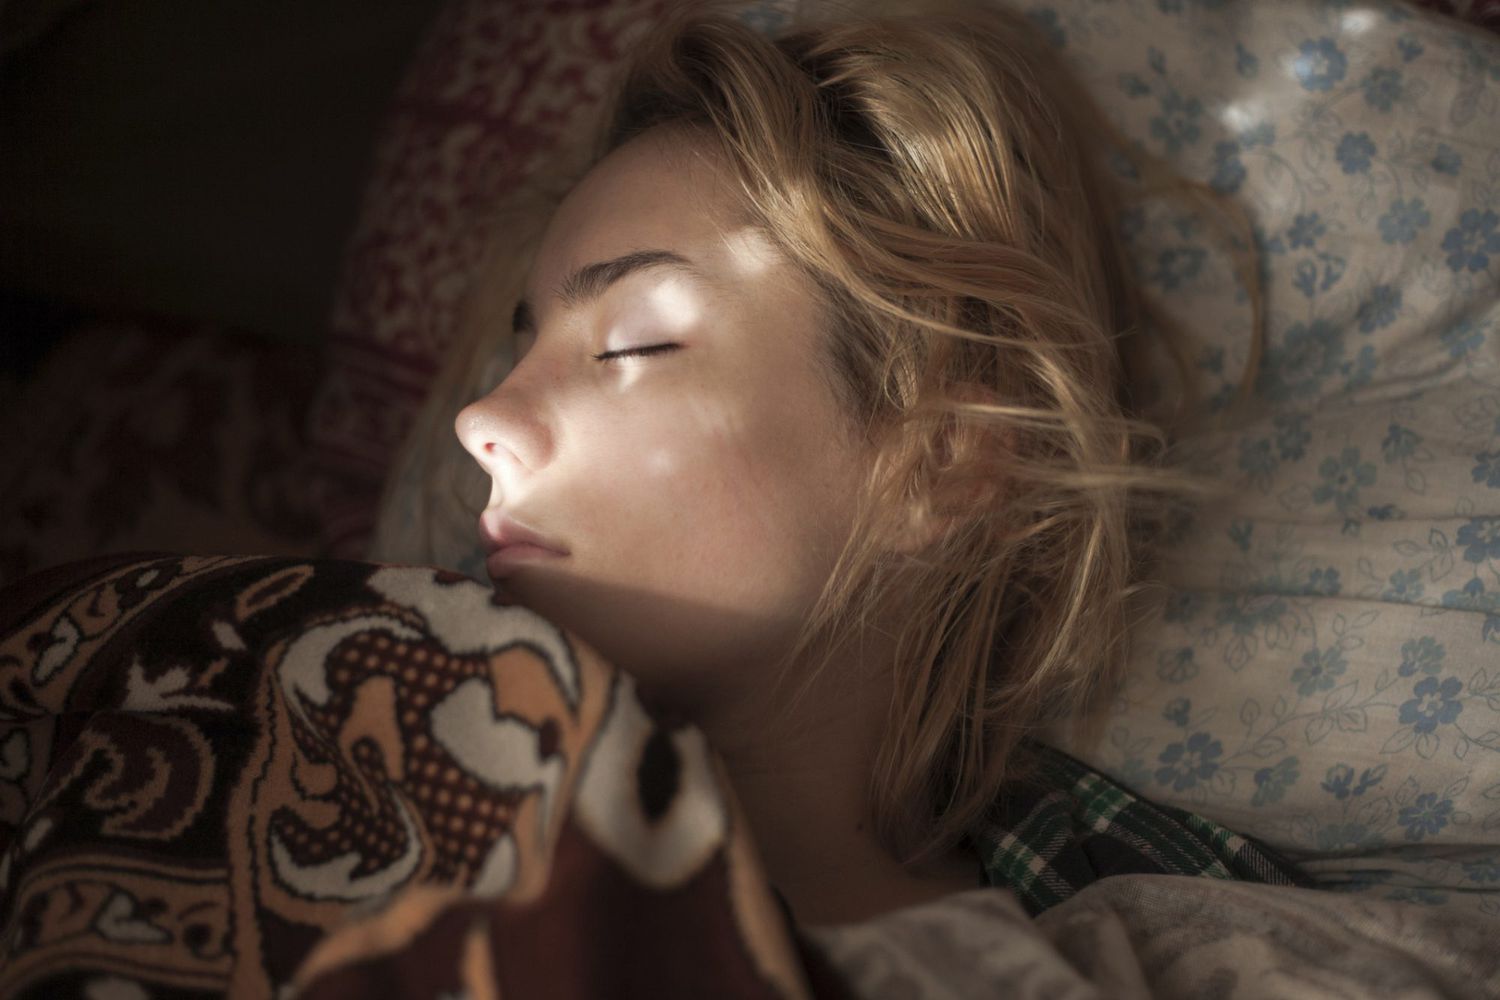 An image of a woman sleeping in bed.